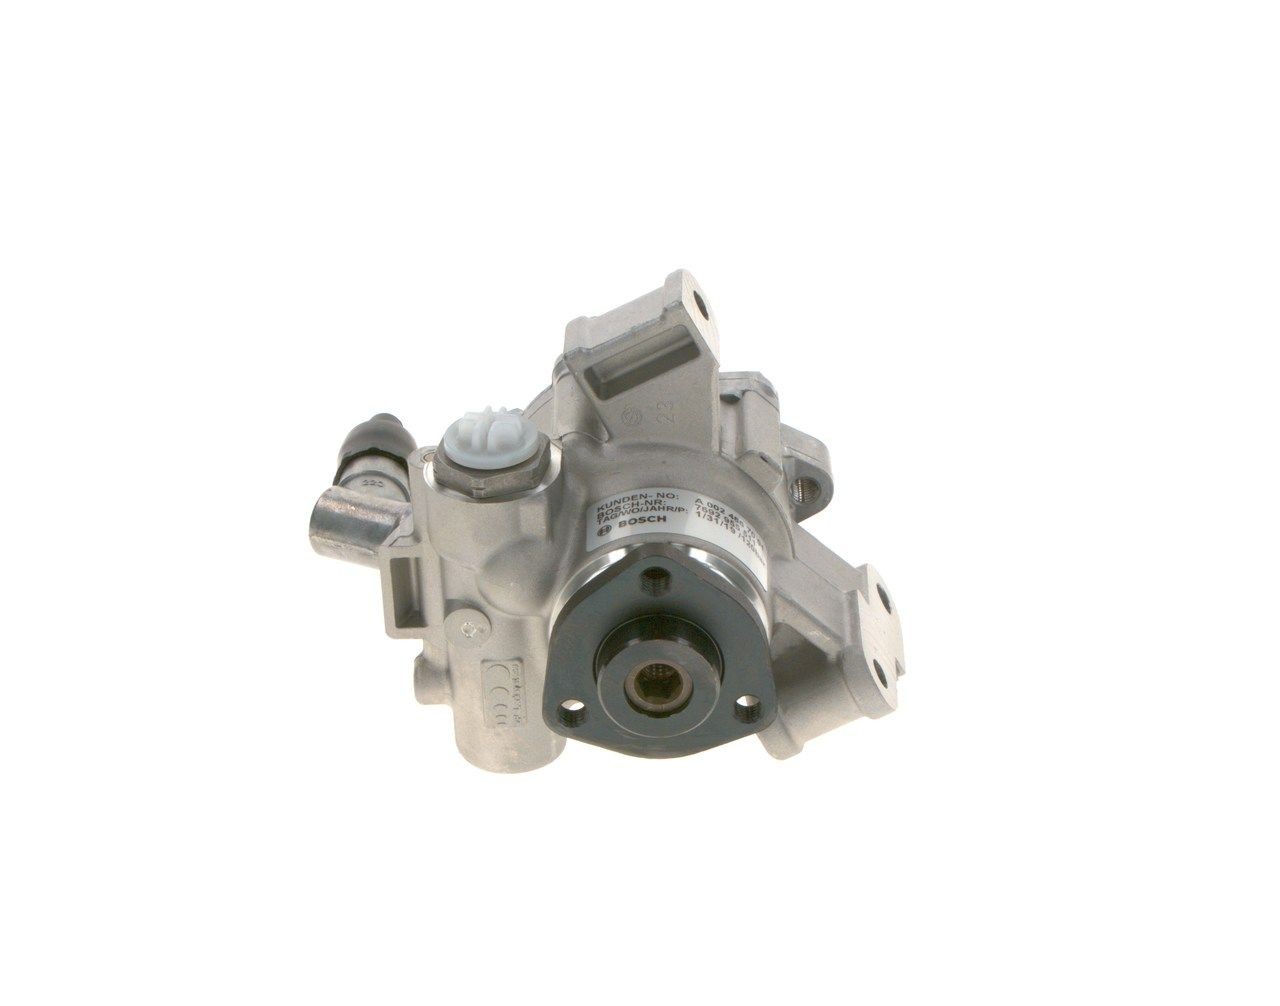 BOSCH Hydraulic steering pump K S01 000 595 suitable for MERCEDES-BENZ VITO, V-Class